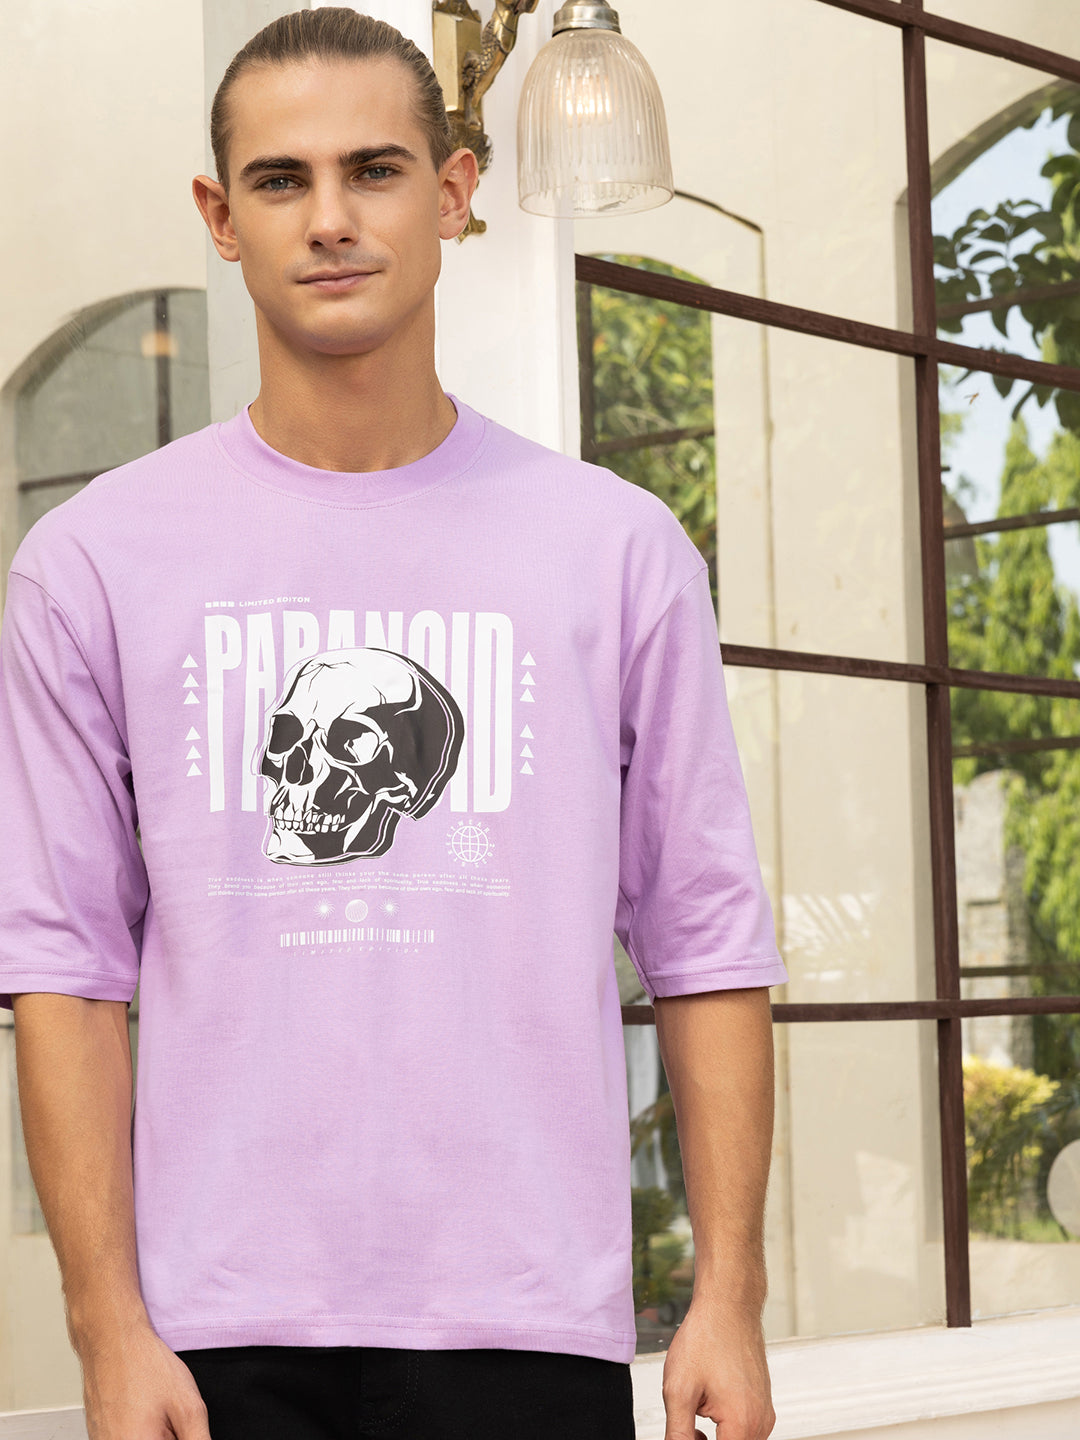 PARANOID LAVENDER Oversized Drop shoulder Tee by Stylo Fashion